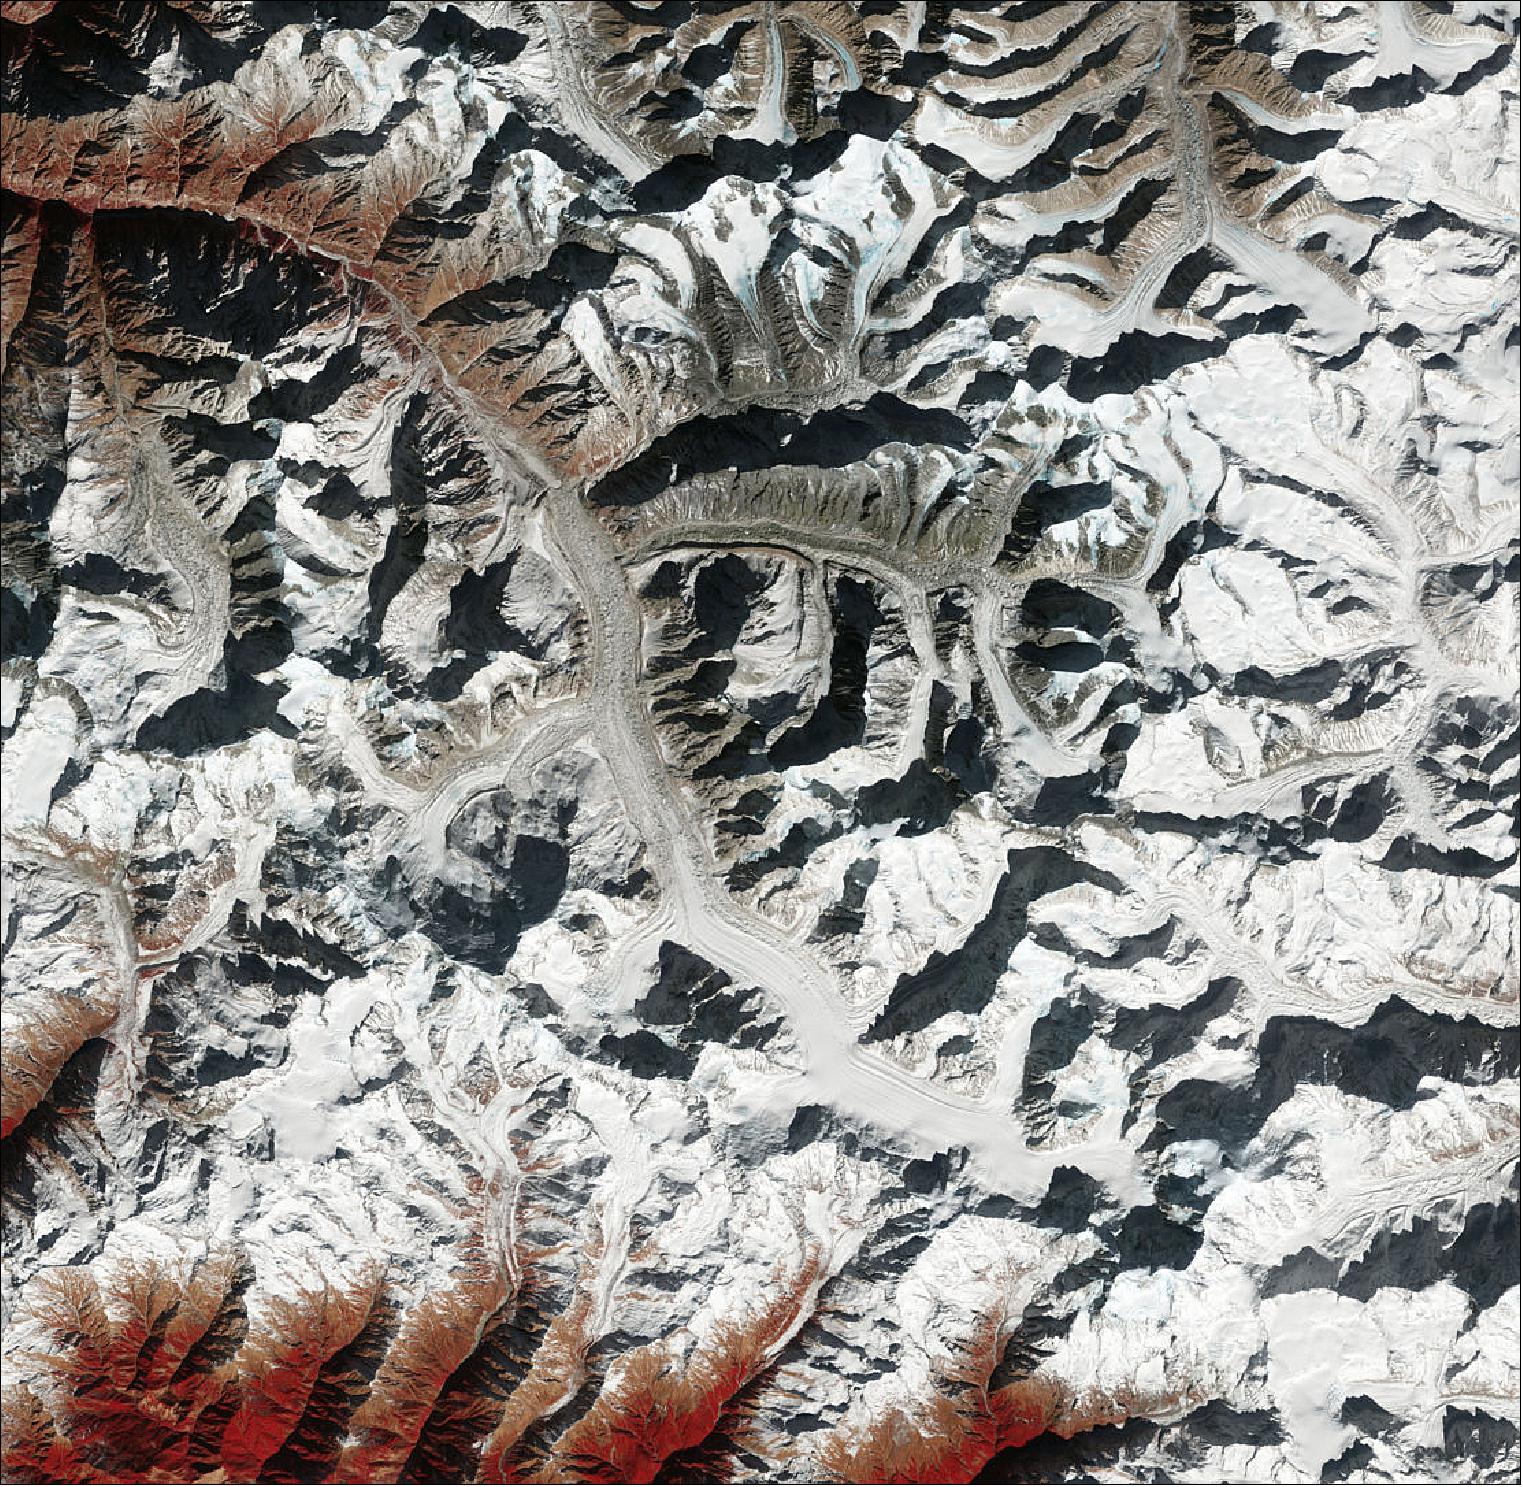 Figure 55: Sentinel-2 captured this image on 7 January 2018, it is also featured on the Earth from Space video program (image credit: ESA, the image contains modified Copernicus Sentinel data (2018), processed by ESA, CC BY-SA 3.0 IGO)